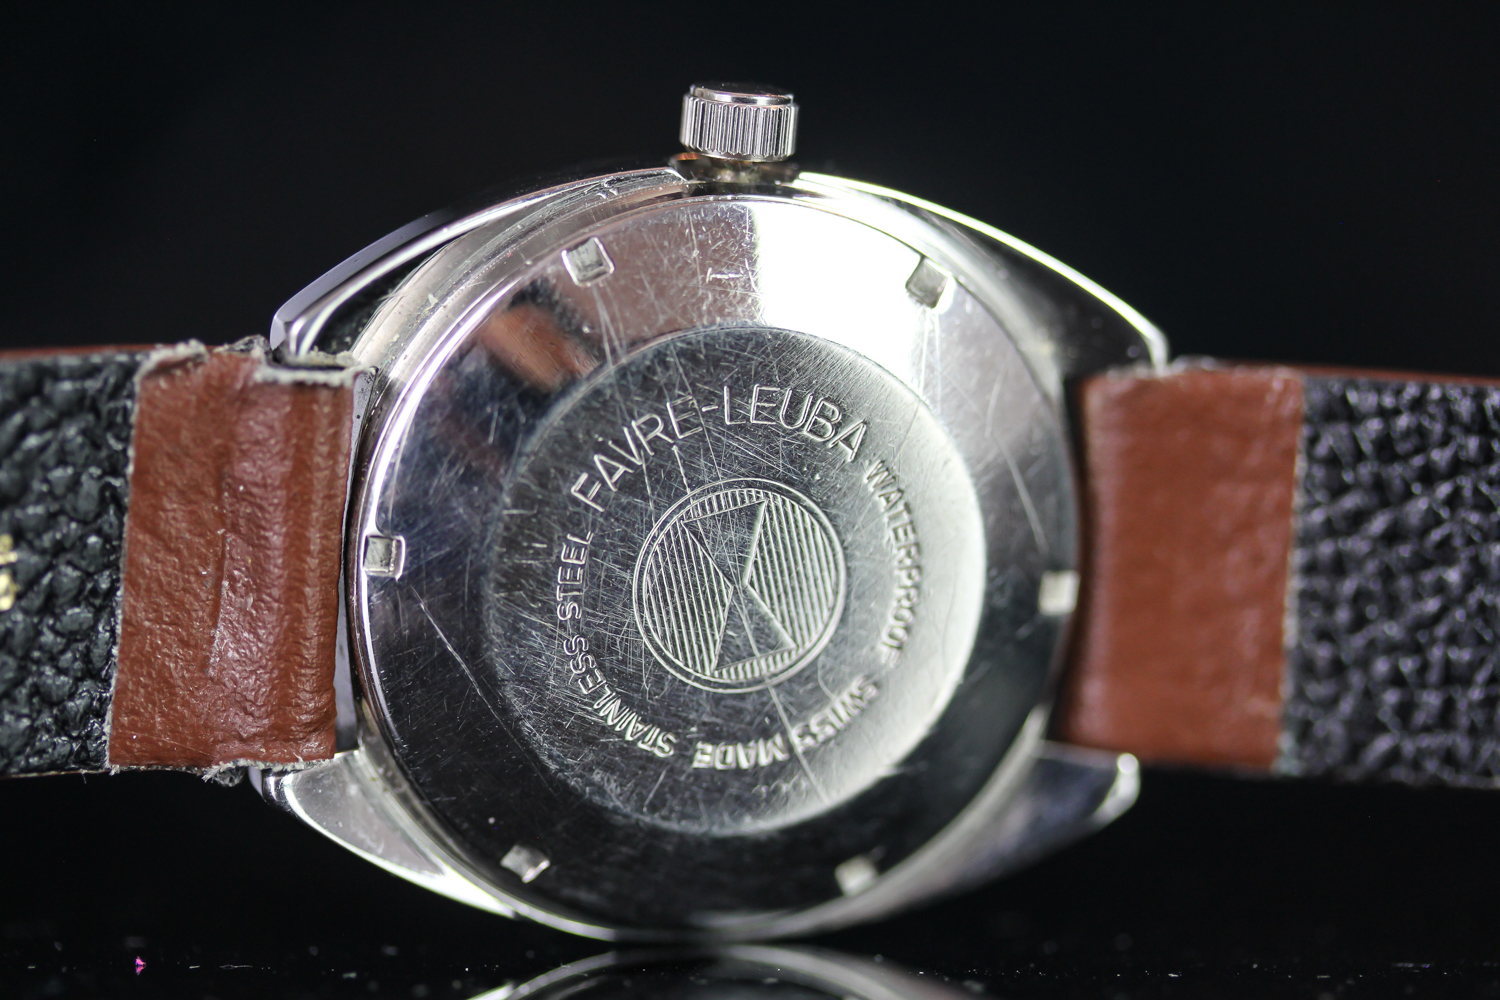 GENTLEMENS FAVRE LEUBA DUOMATIC WRISTWATCH, circular blue dial with hour markers, date at 3 0'clock, - Image 3 of 3